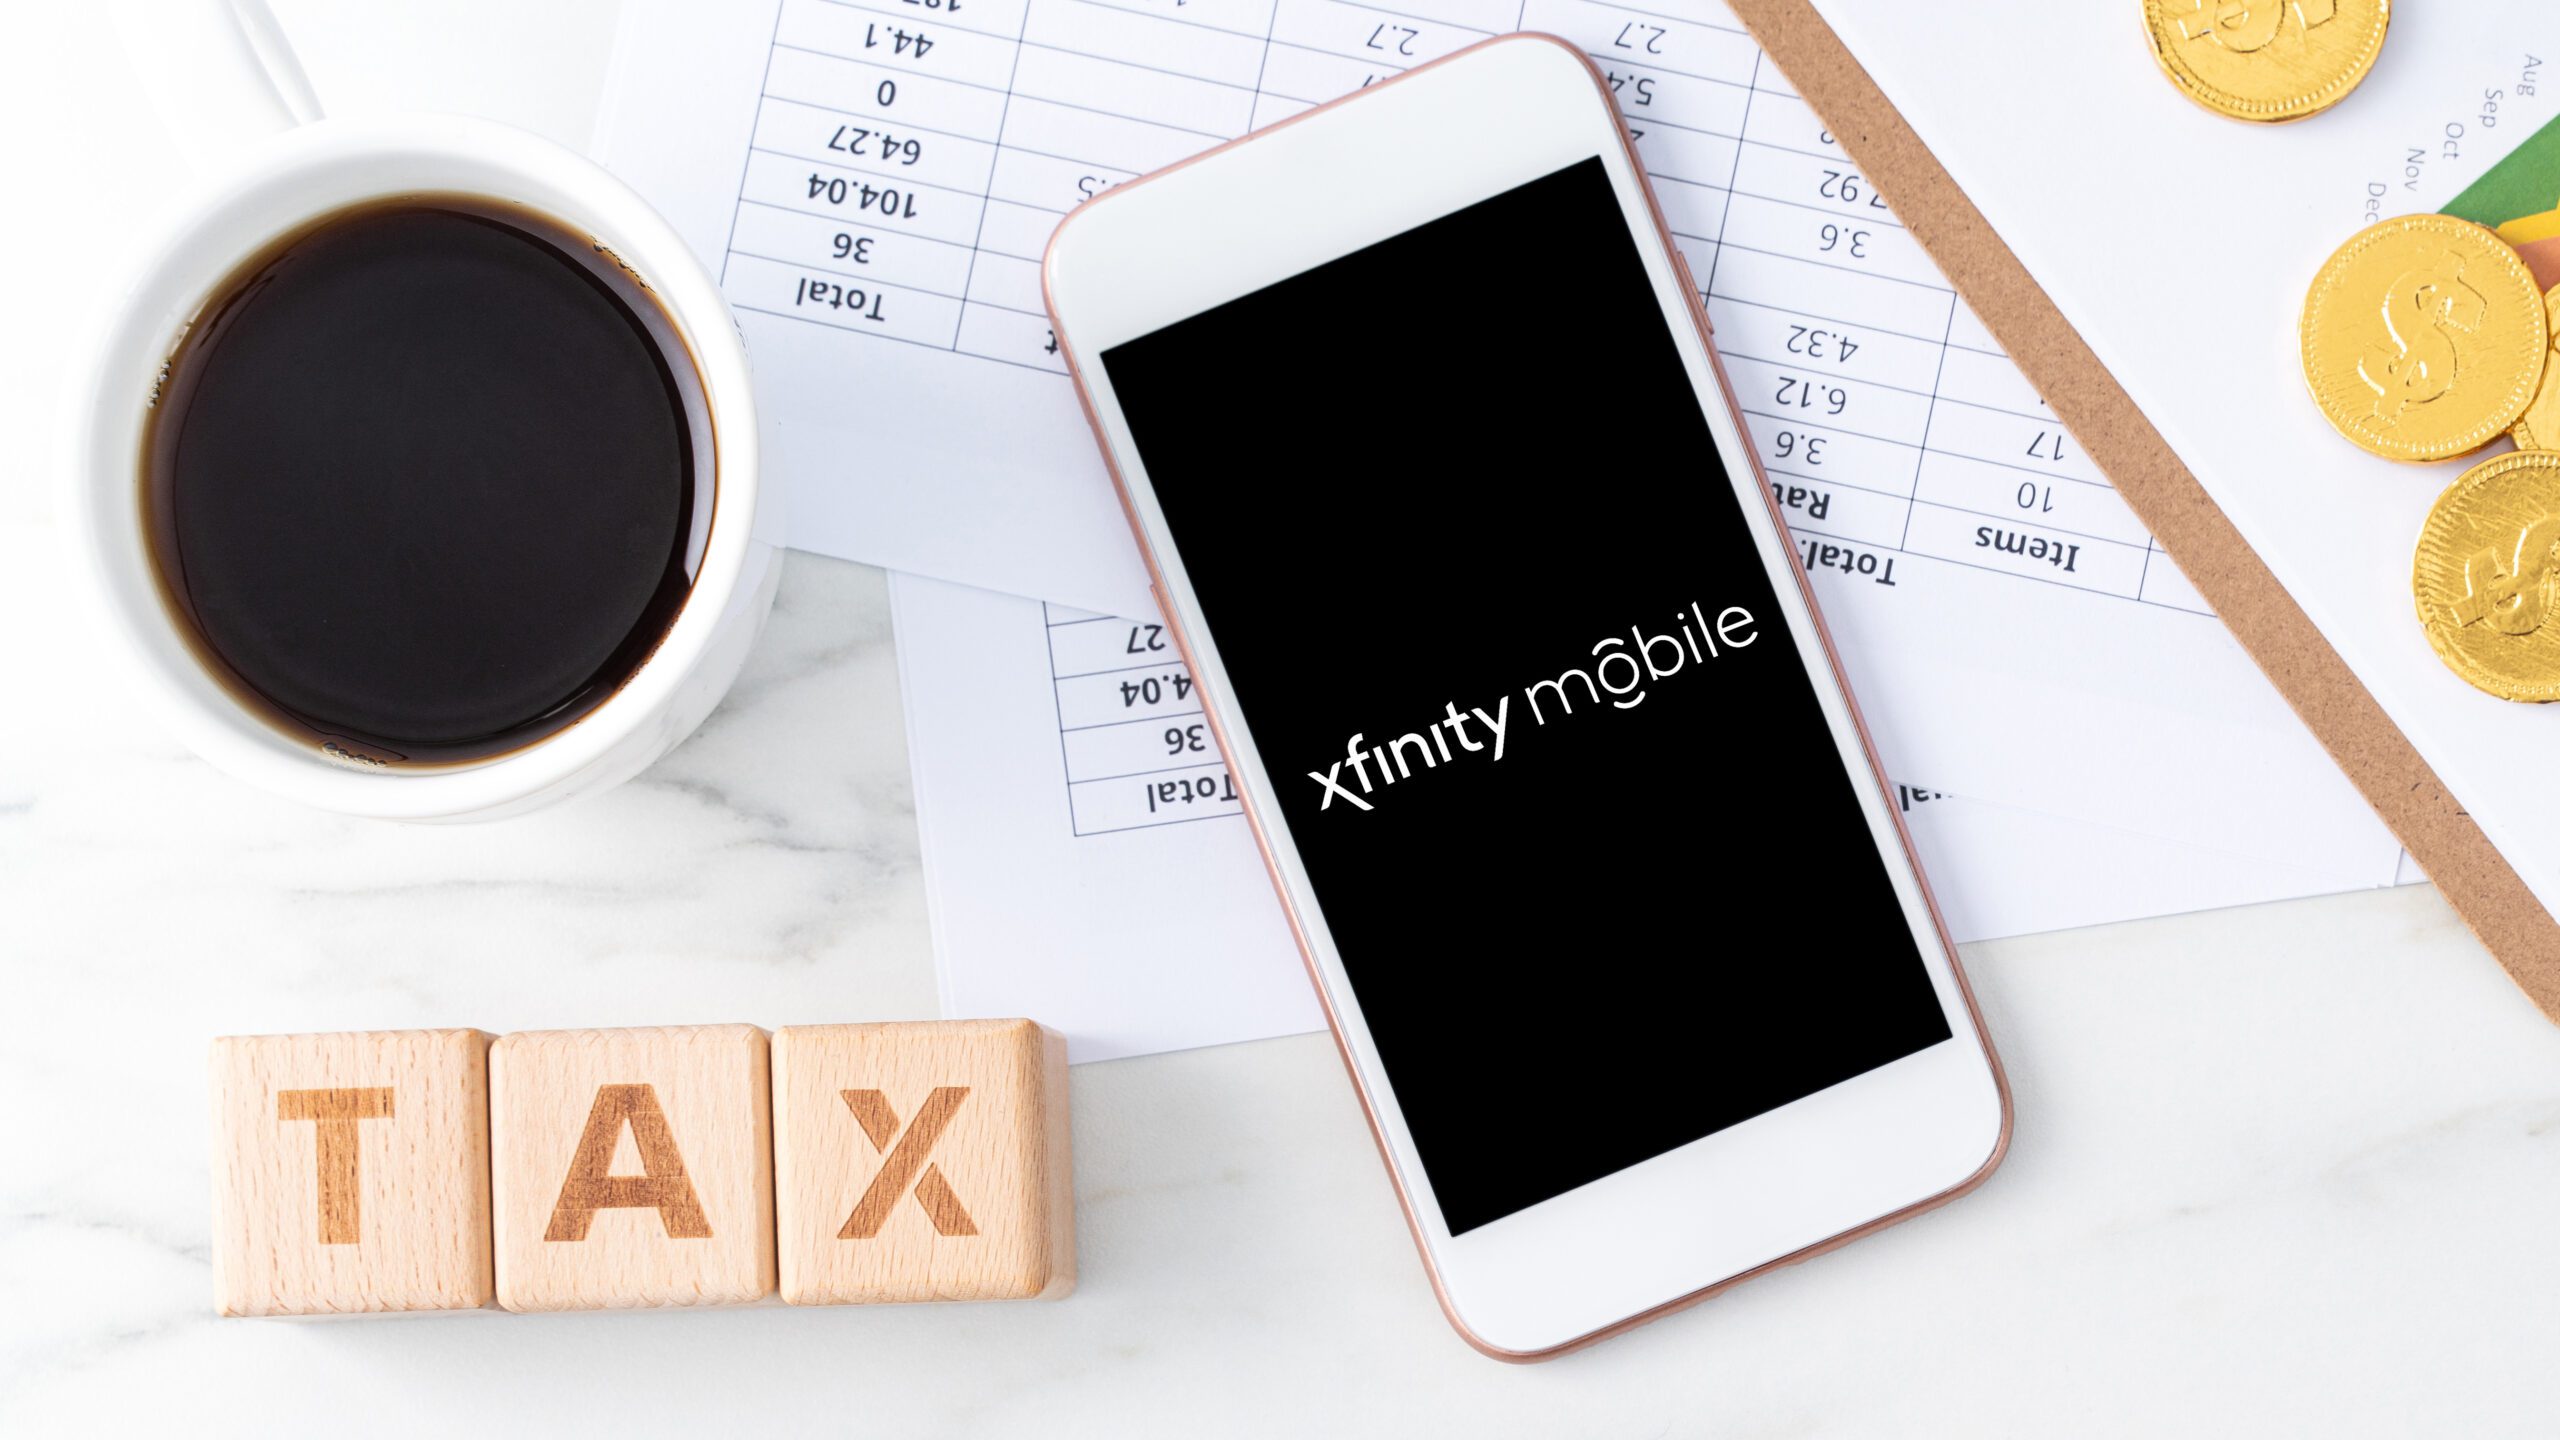 Tax Returns are Here Just in Time for New Xfinity Mobile Offers for Michigan Customers